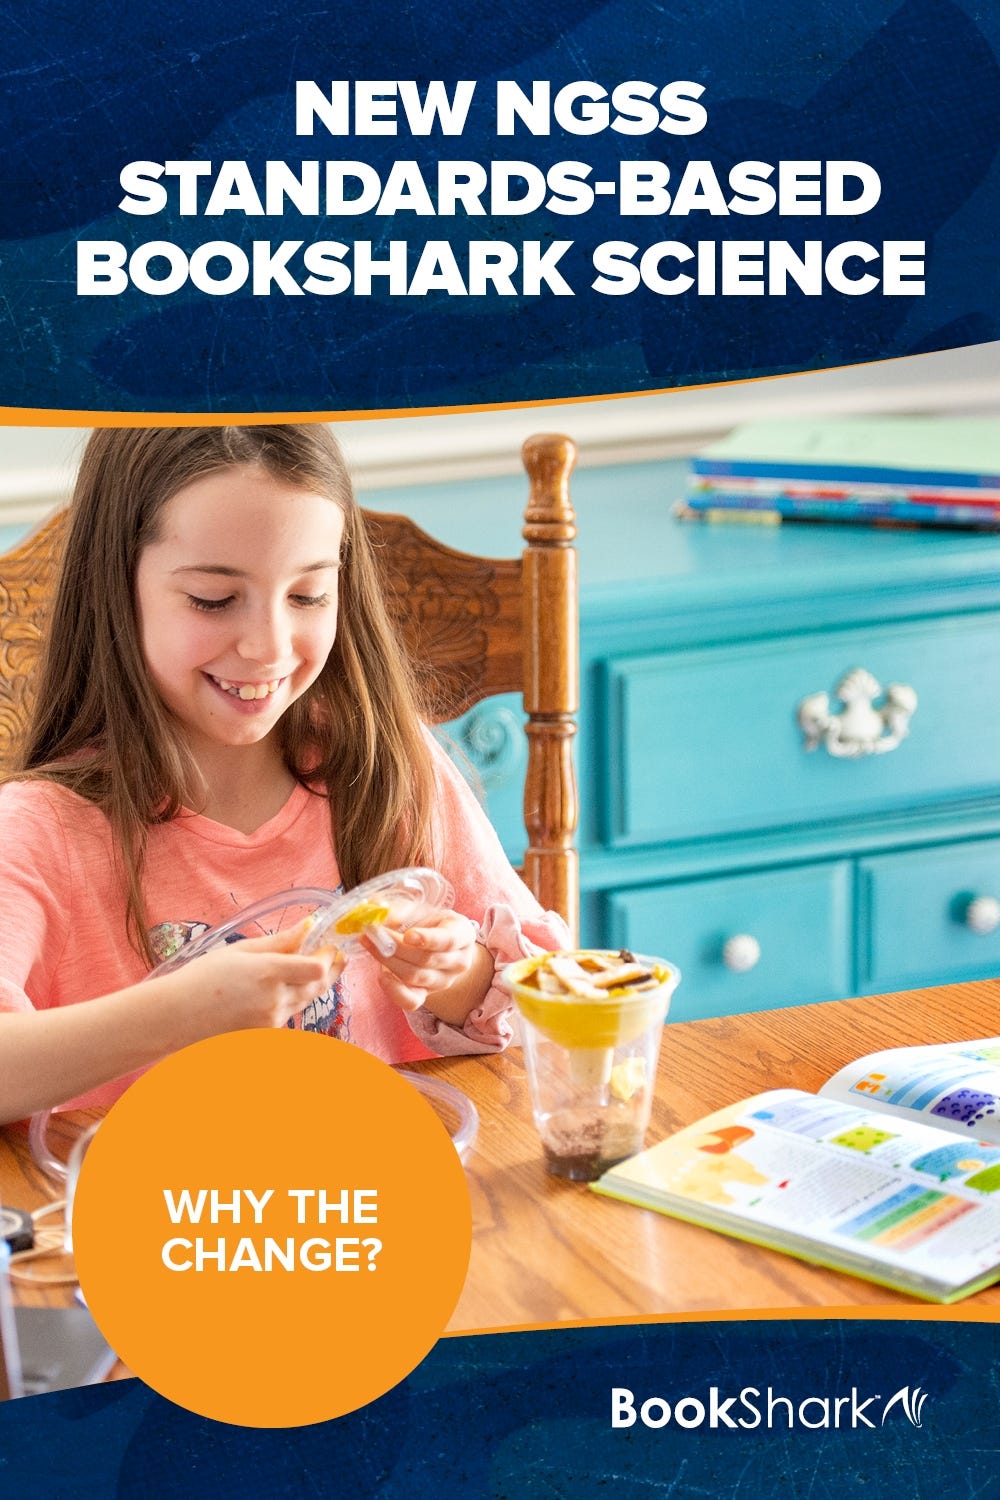 New NGSS Standards-based BookShark Science: Why the Change?